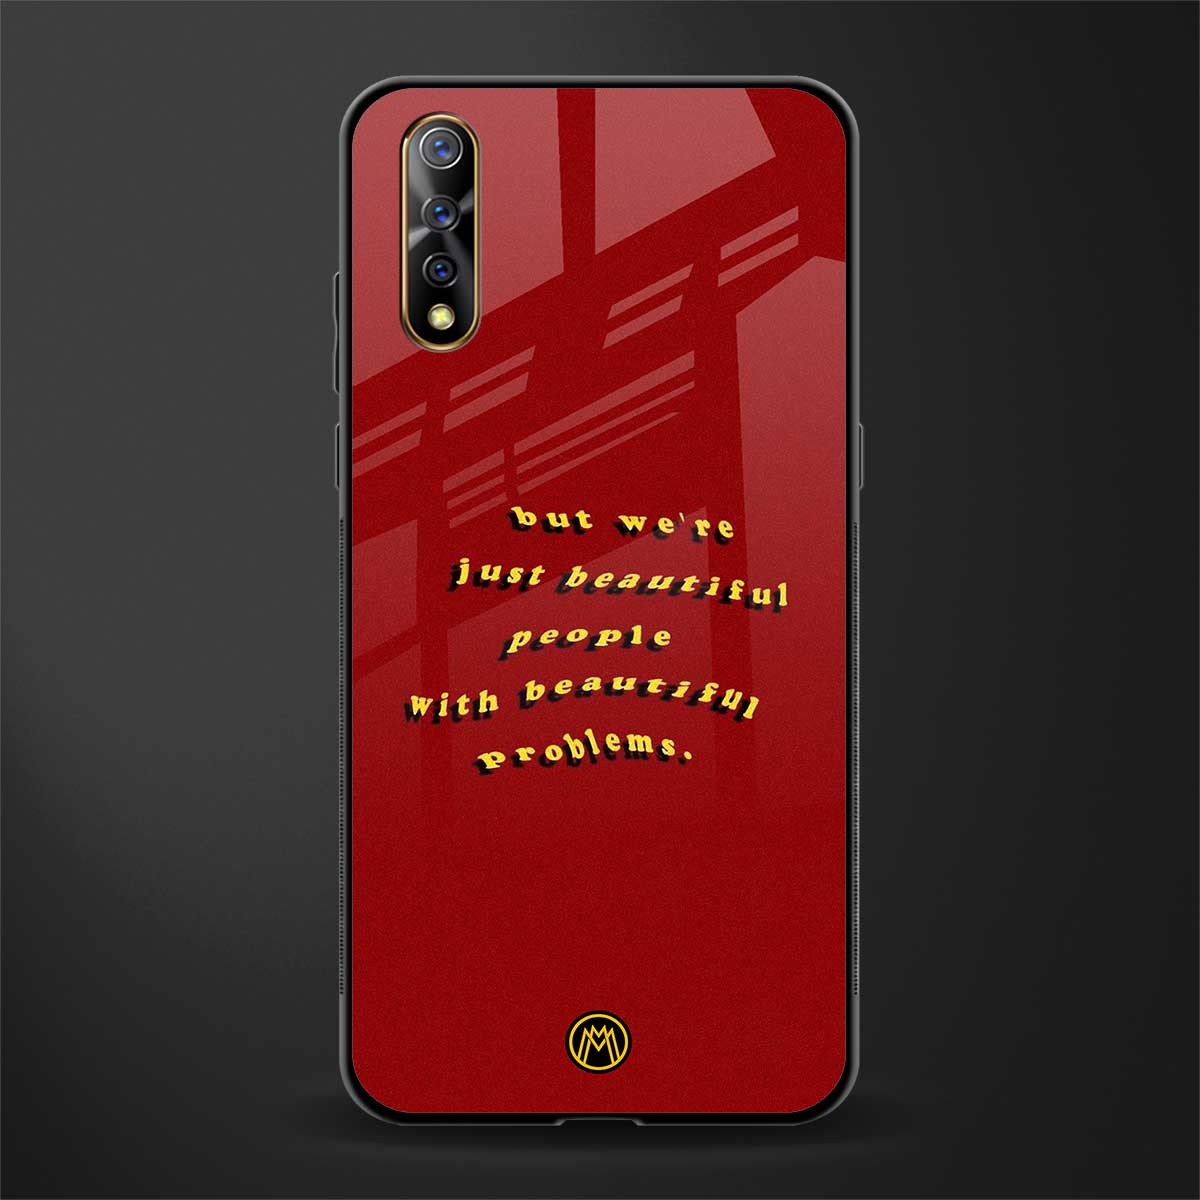 beautiful people with beautiful problems glass case for vivo s1 image